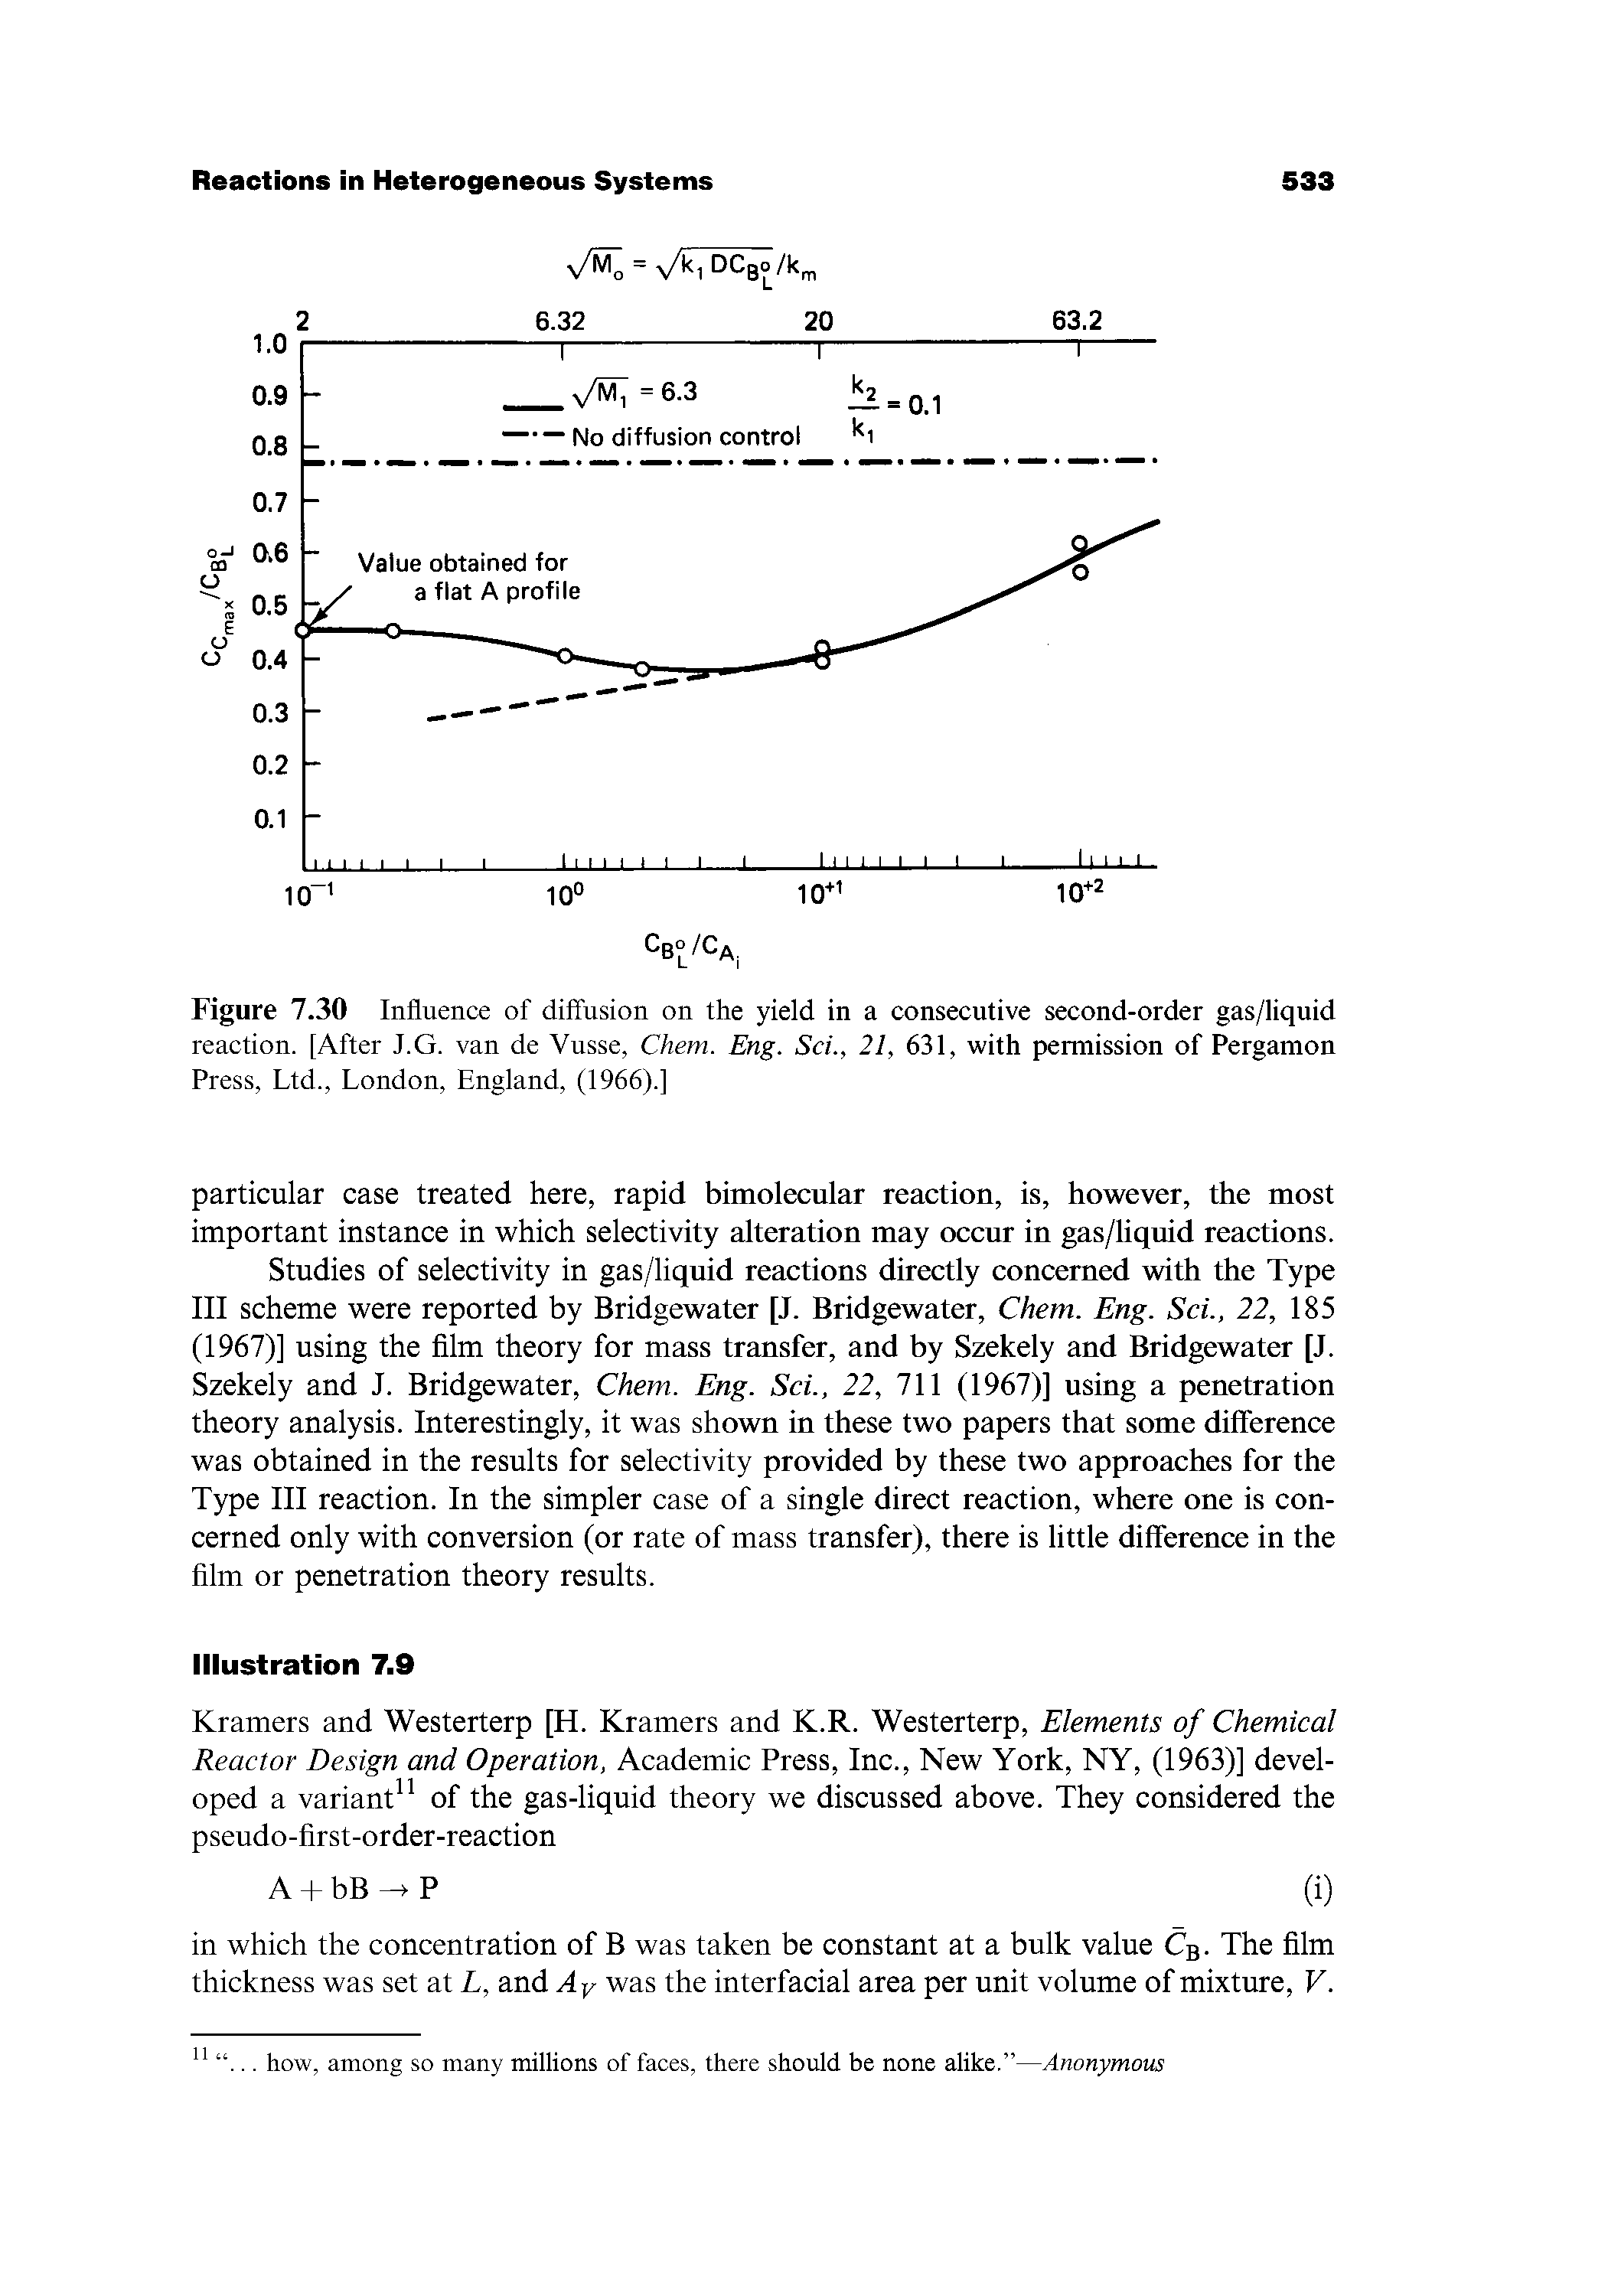 Figure 7.30 Influence of diflnsion on the yield in a consecutive second-order gas/liquid reaction. [After J.G. van de Vusse, Chem. Eng. Sci., 21, 631, with permission of Pergamon Press, Ltd., London, England, (1966).]...